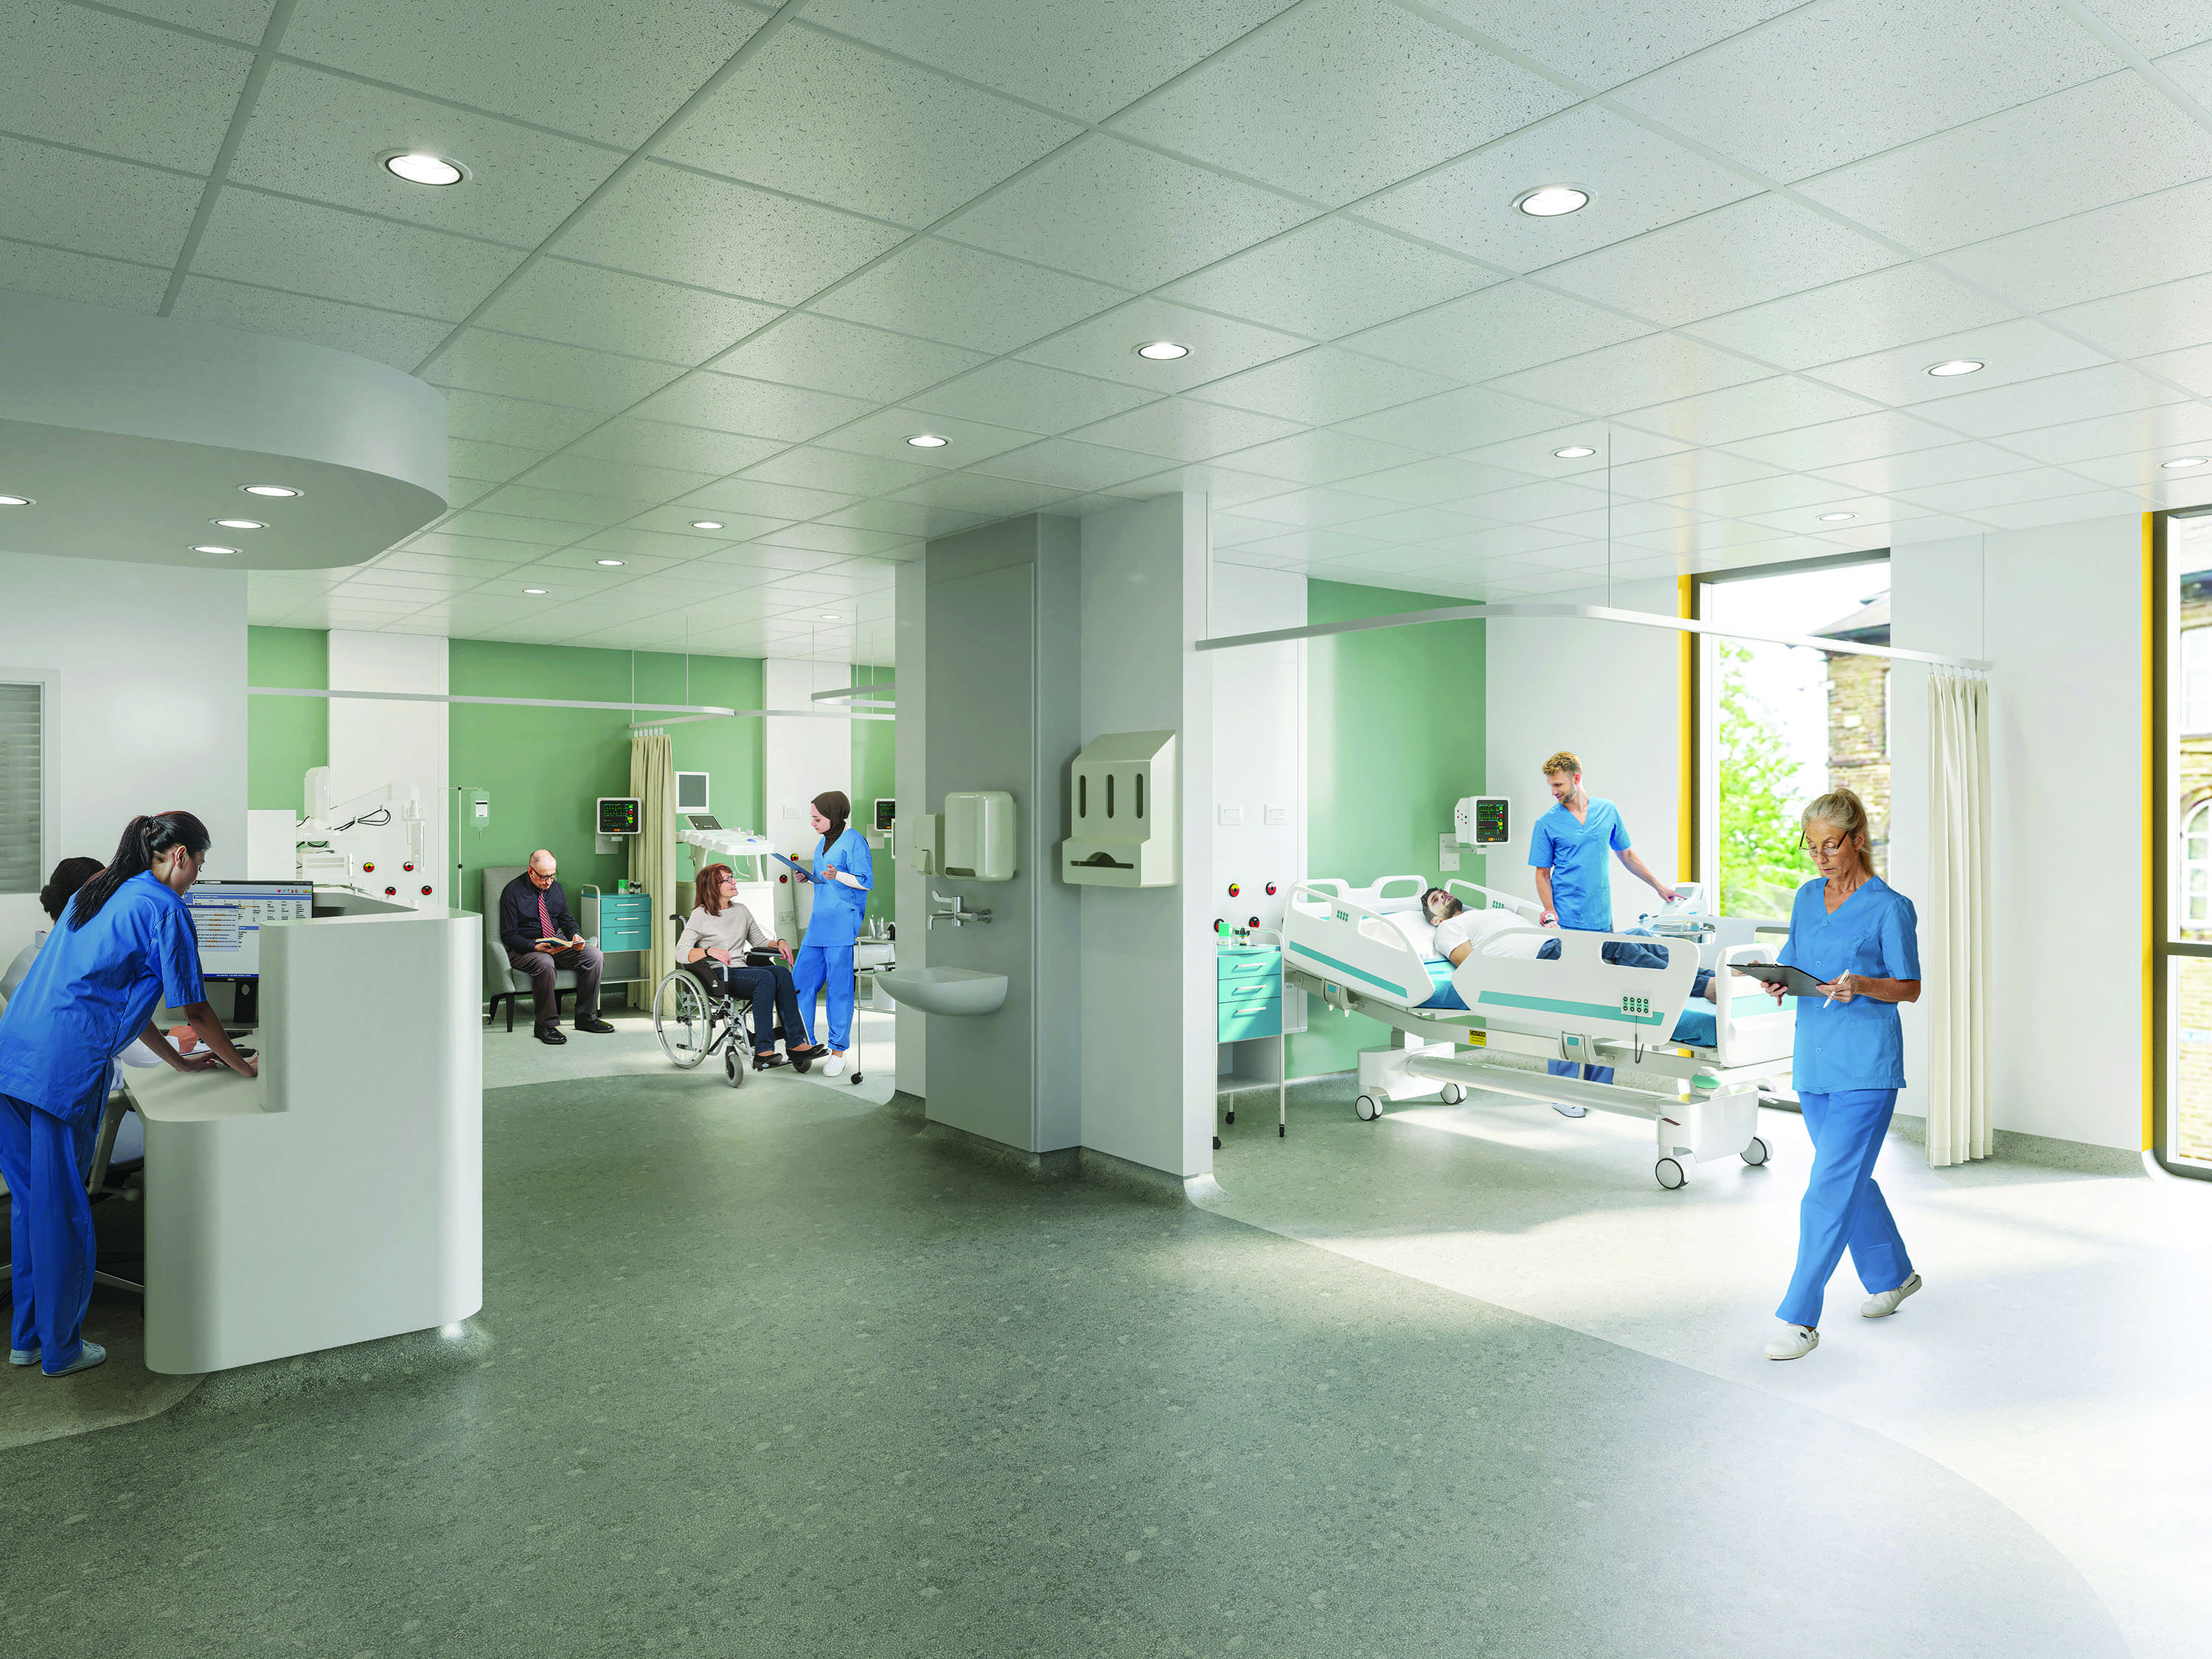 Architectural render of the internal layout of the new day case unit. A number of clinicians are treating patients. To the left there is a nurses' station.